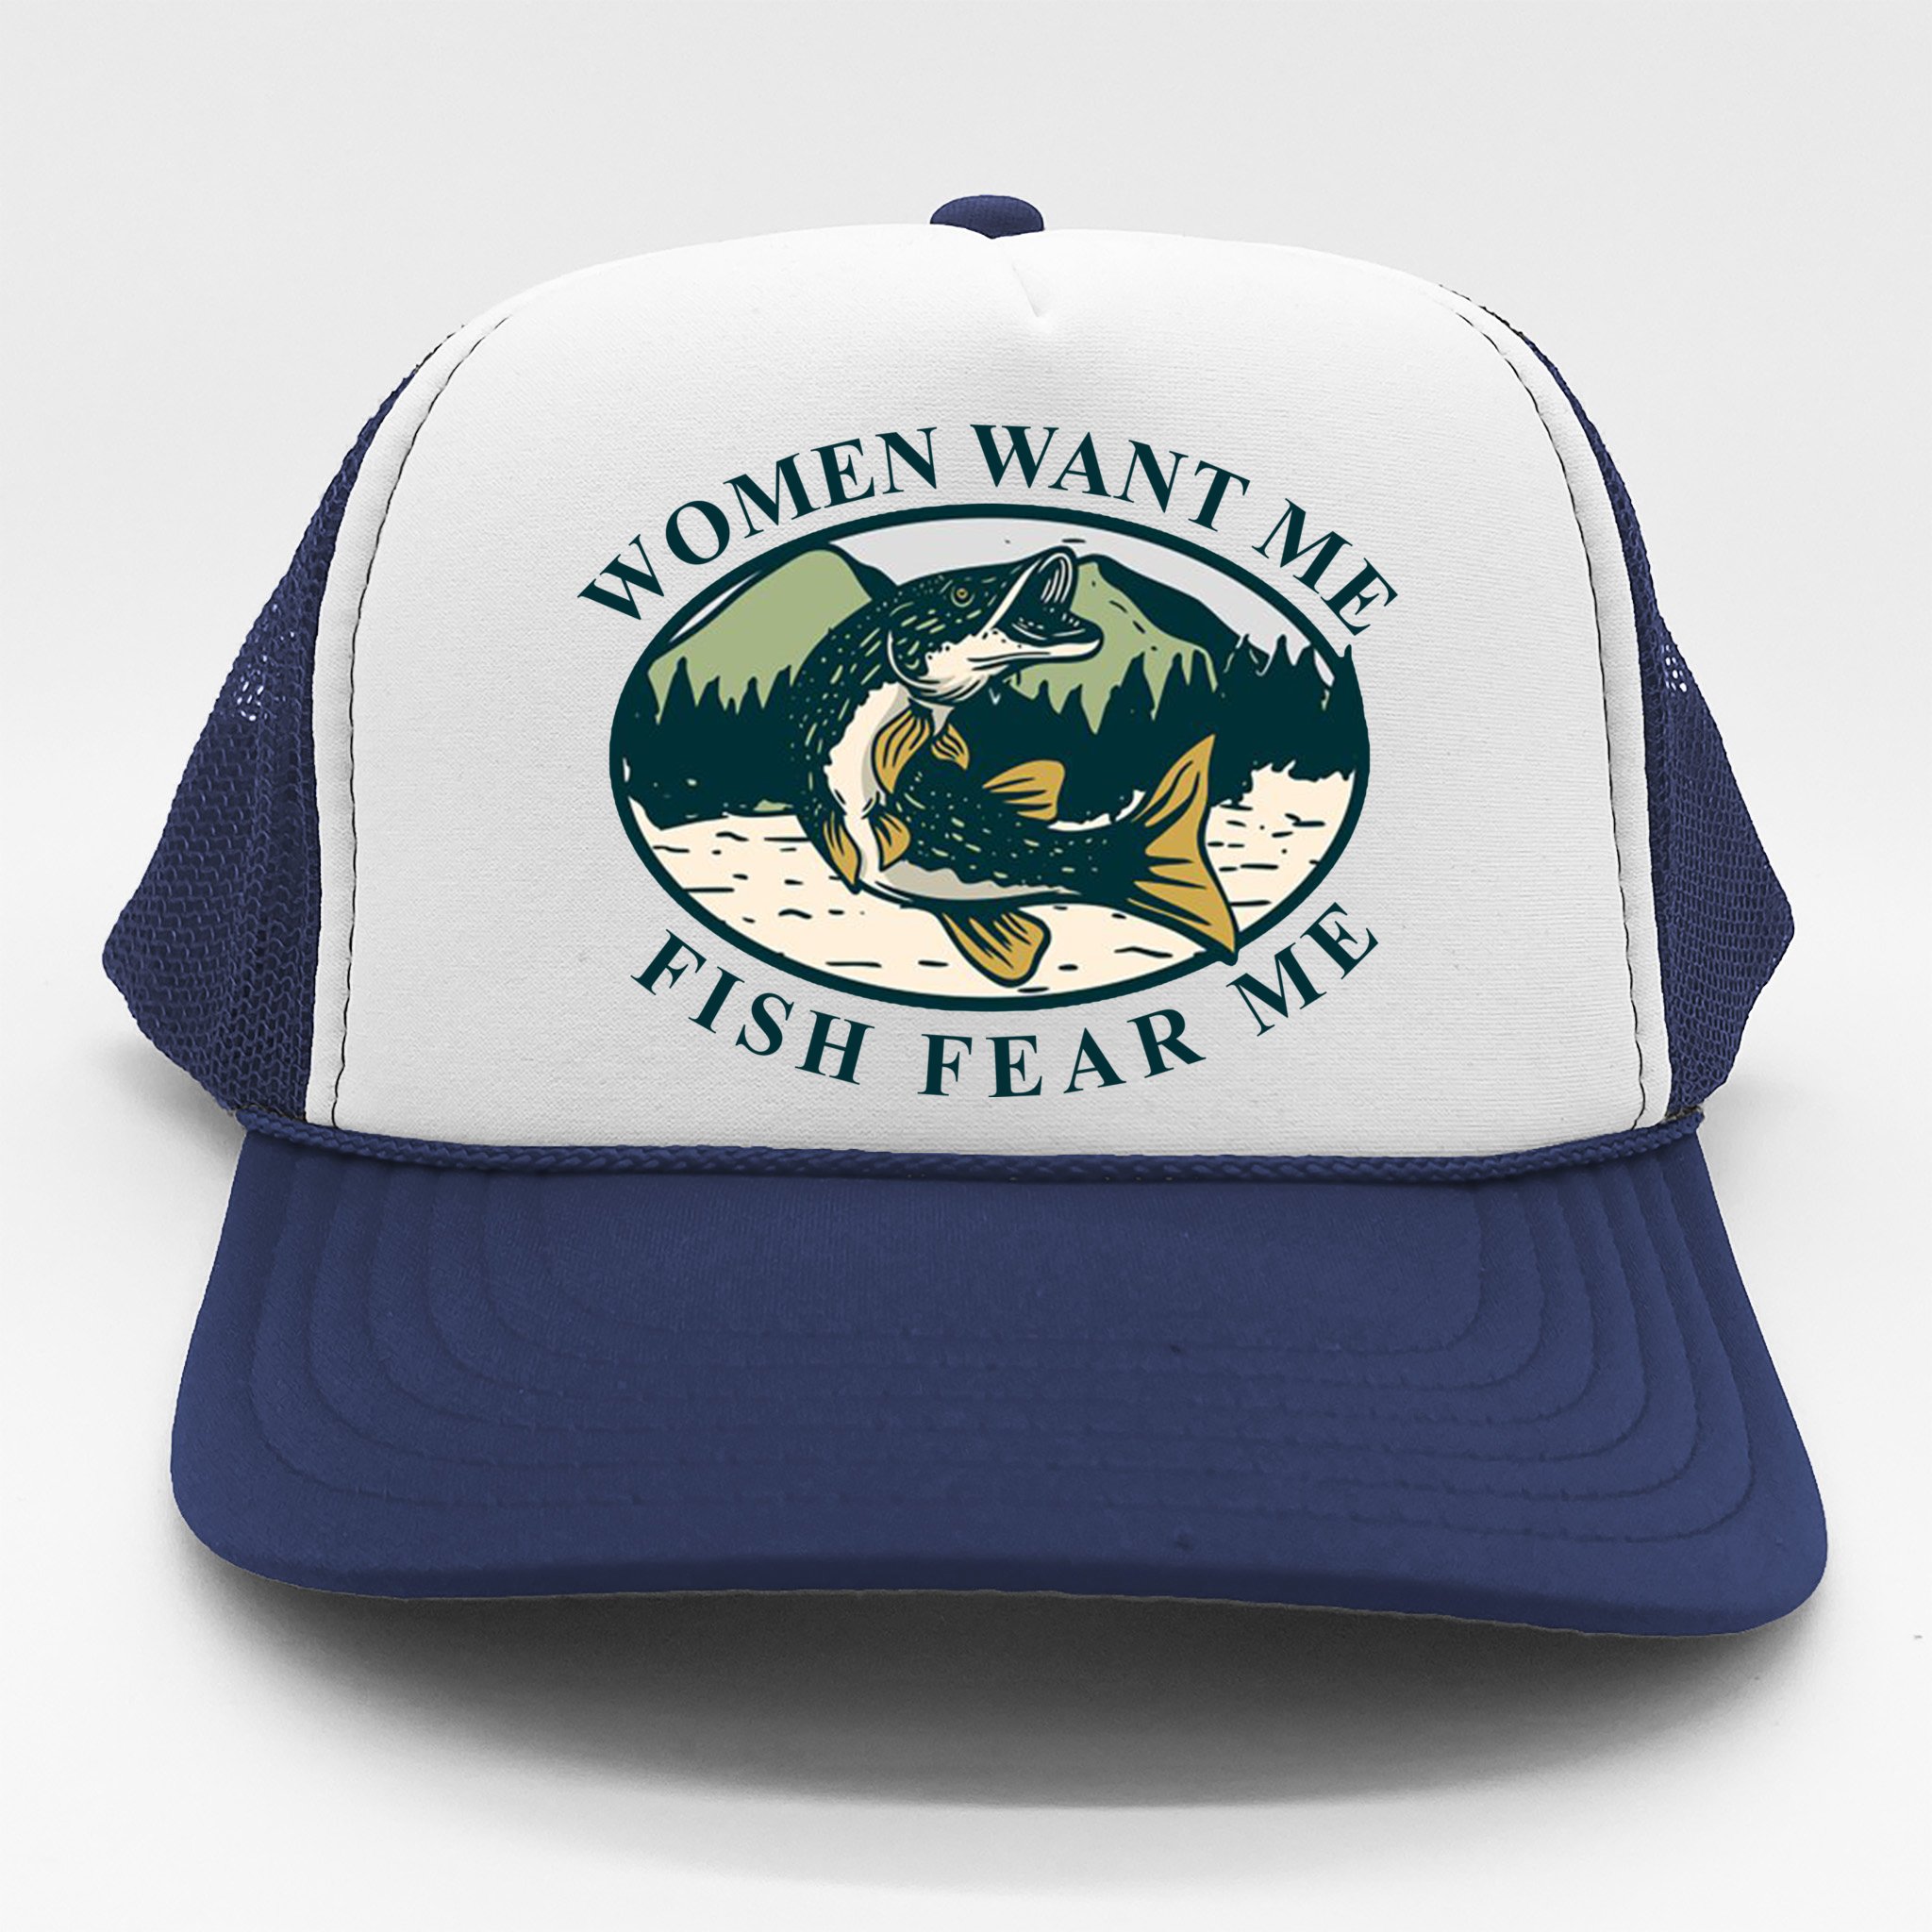 Fish Want me Women Fear me hat River hat Funny Trucker hat Gifts for  Boyfriends Running Caps